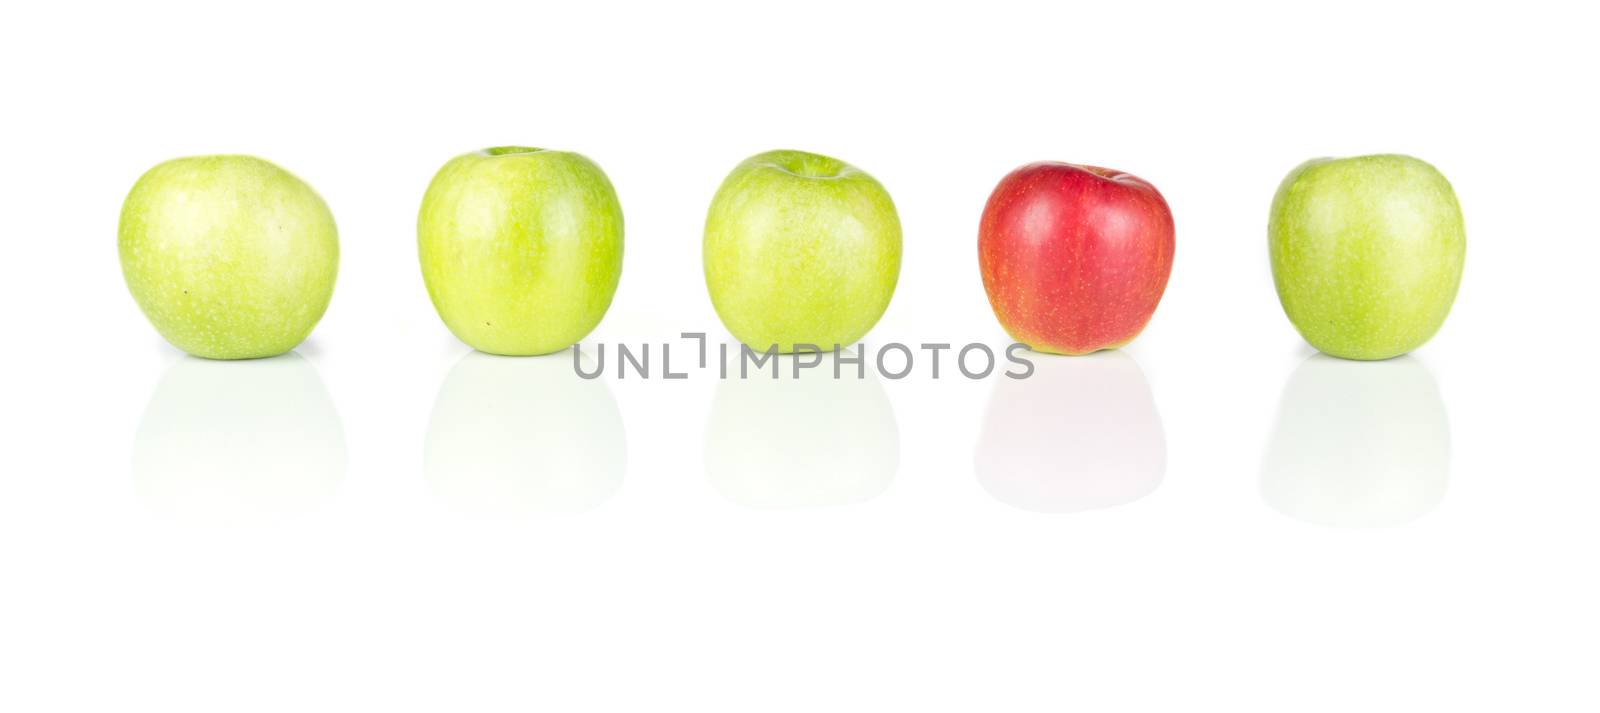 Line of green apples and one red apple isolated on white